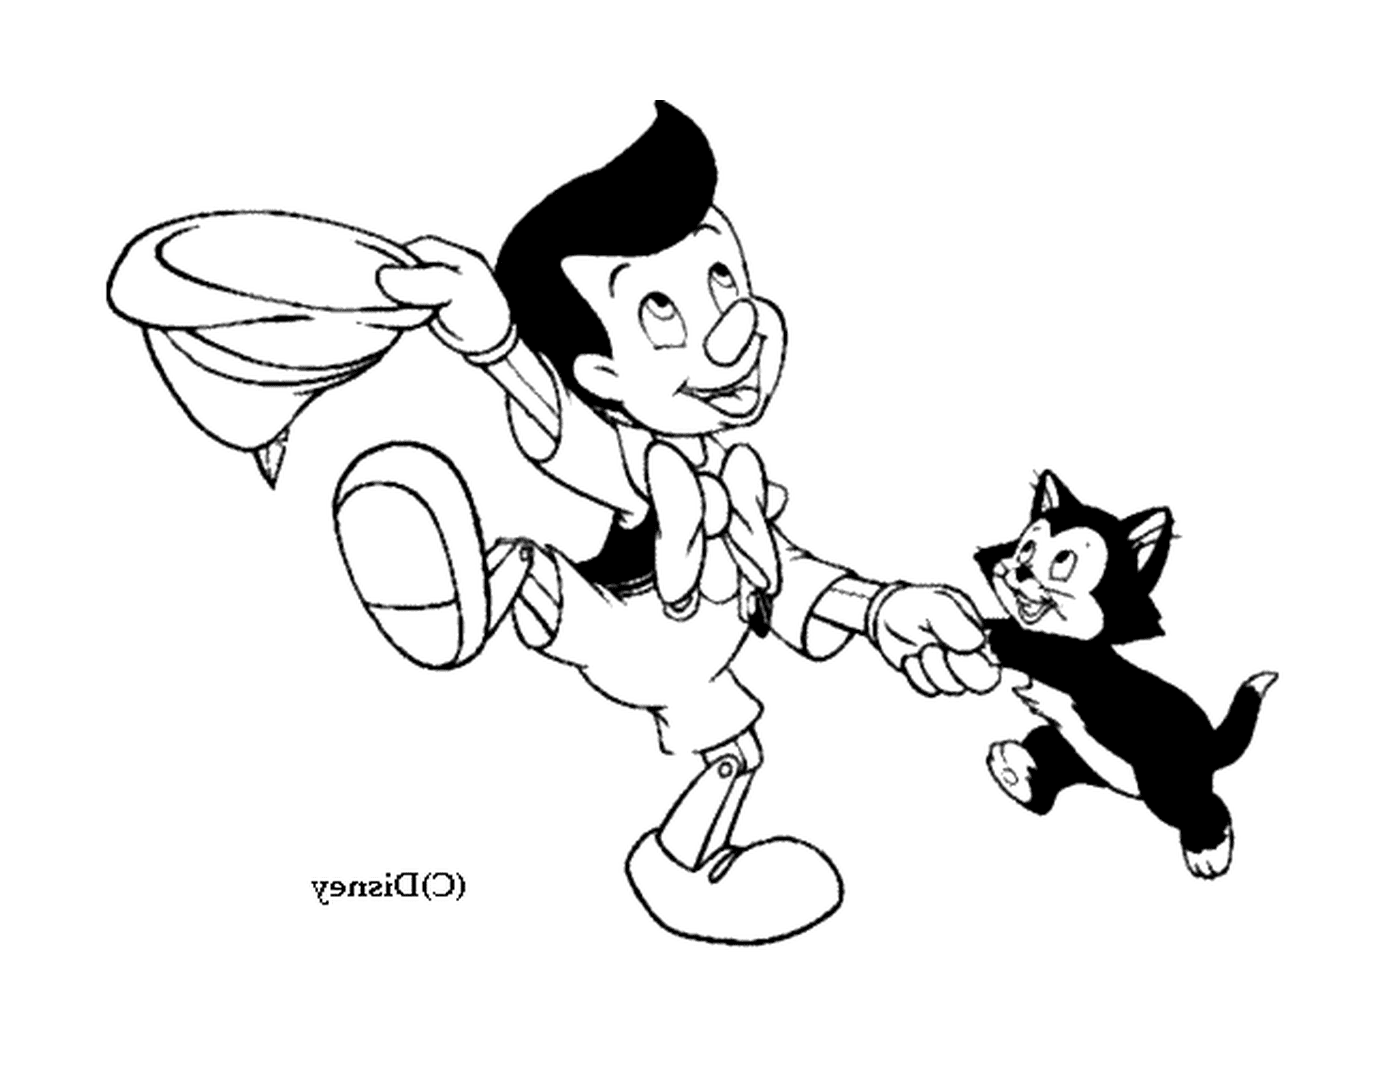  Pinocchio plays with the cat 